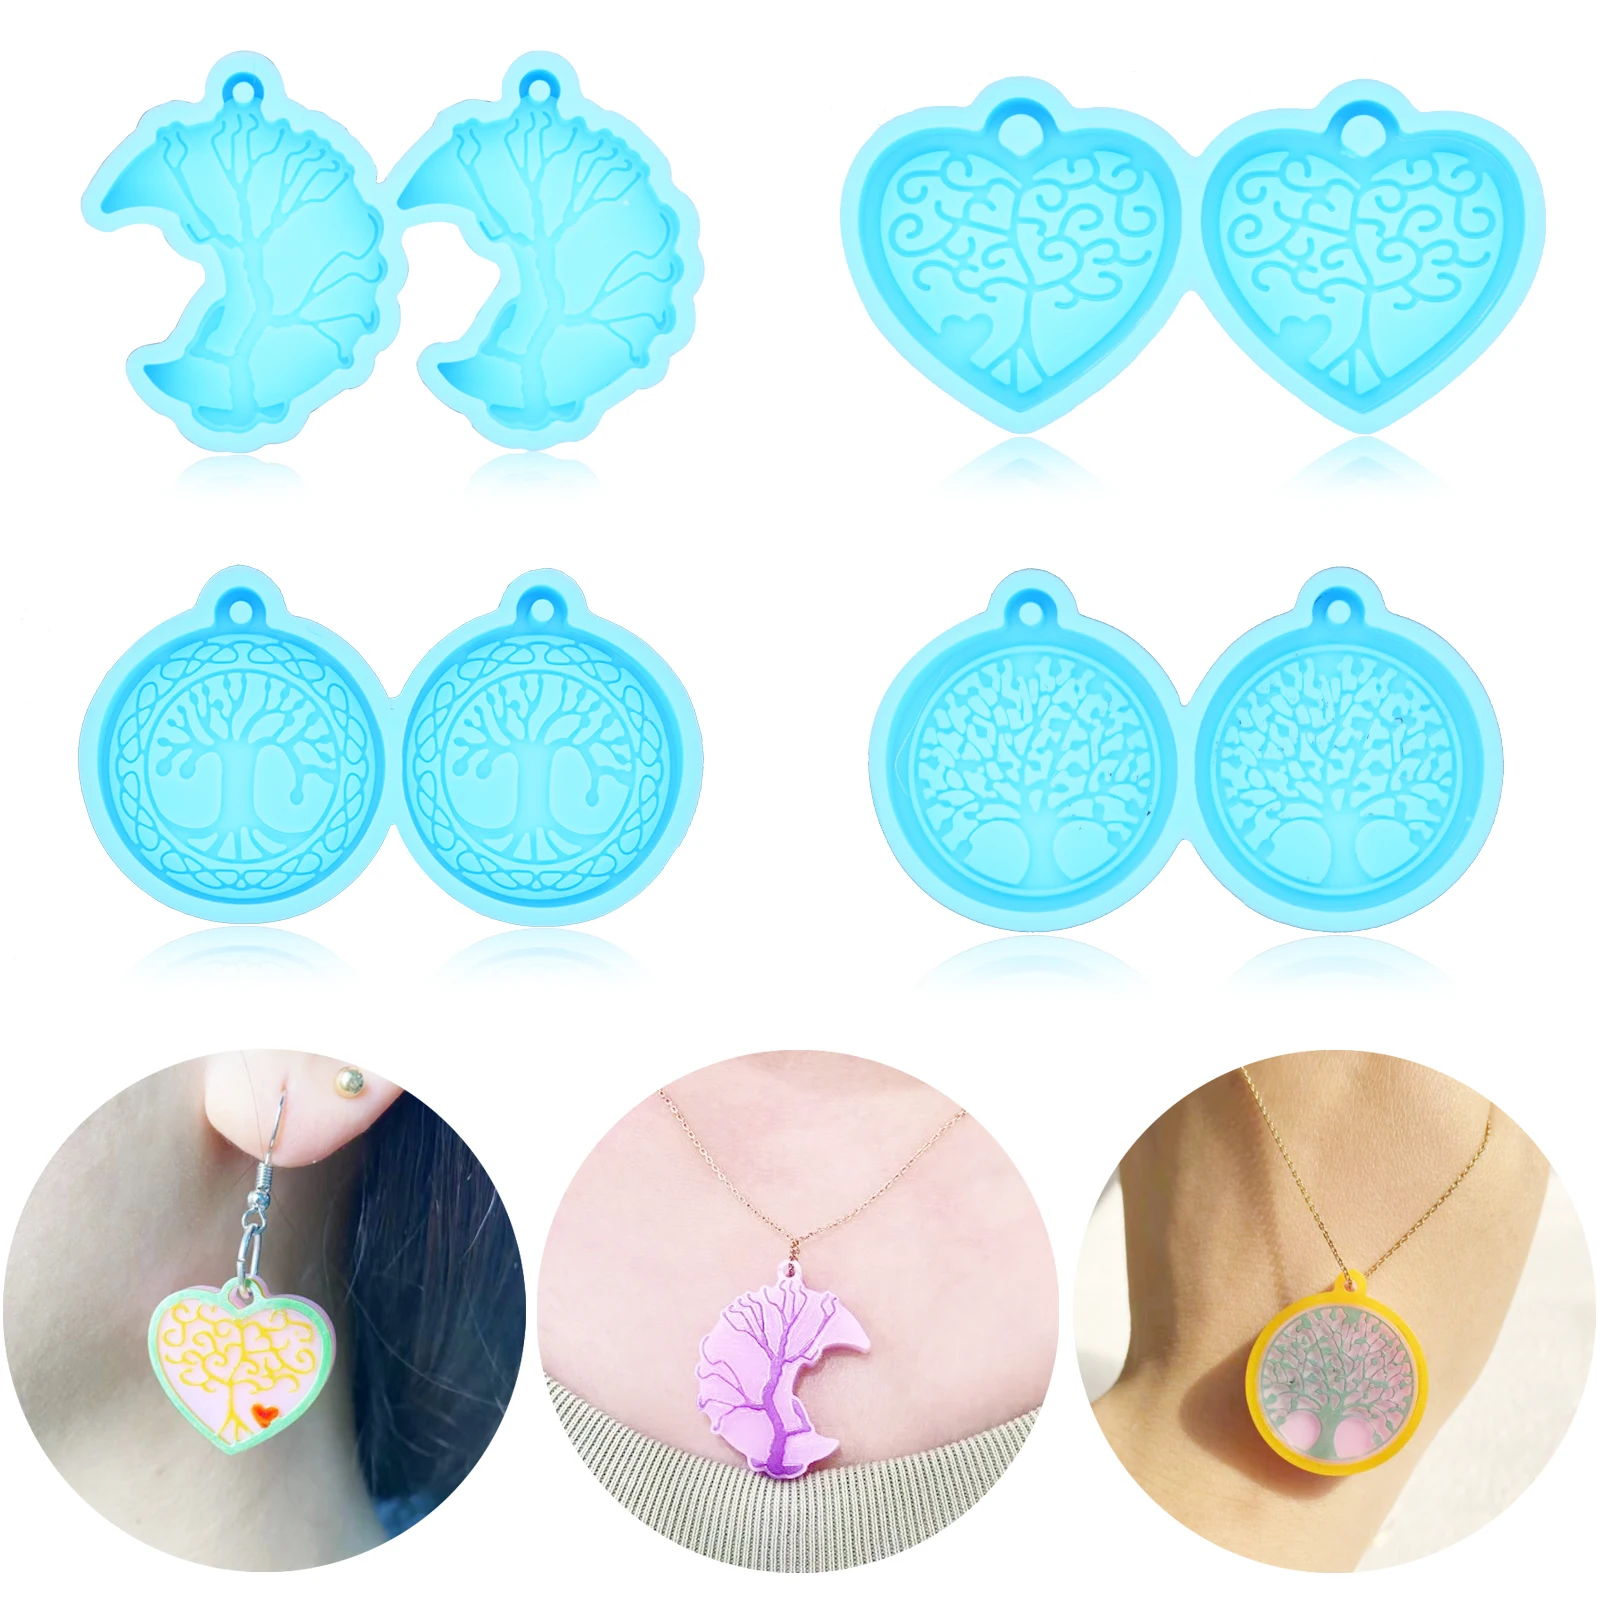 New Round Heart Earrings UV Resin Mold Tree of Life Necklace Keychain Pendant Epoxy Silicone Mold DIY Jewerly Making Supplies new round heart earrings uv resin mold tree of life necklace keychain pendant epoxy silicone mold diy jewerly making supplies